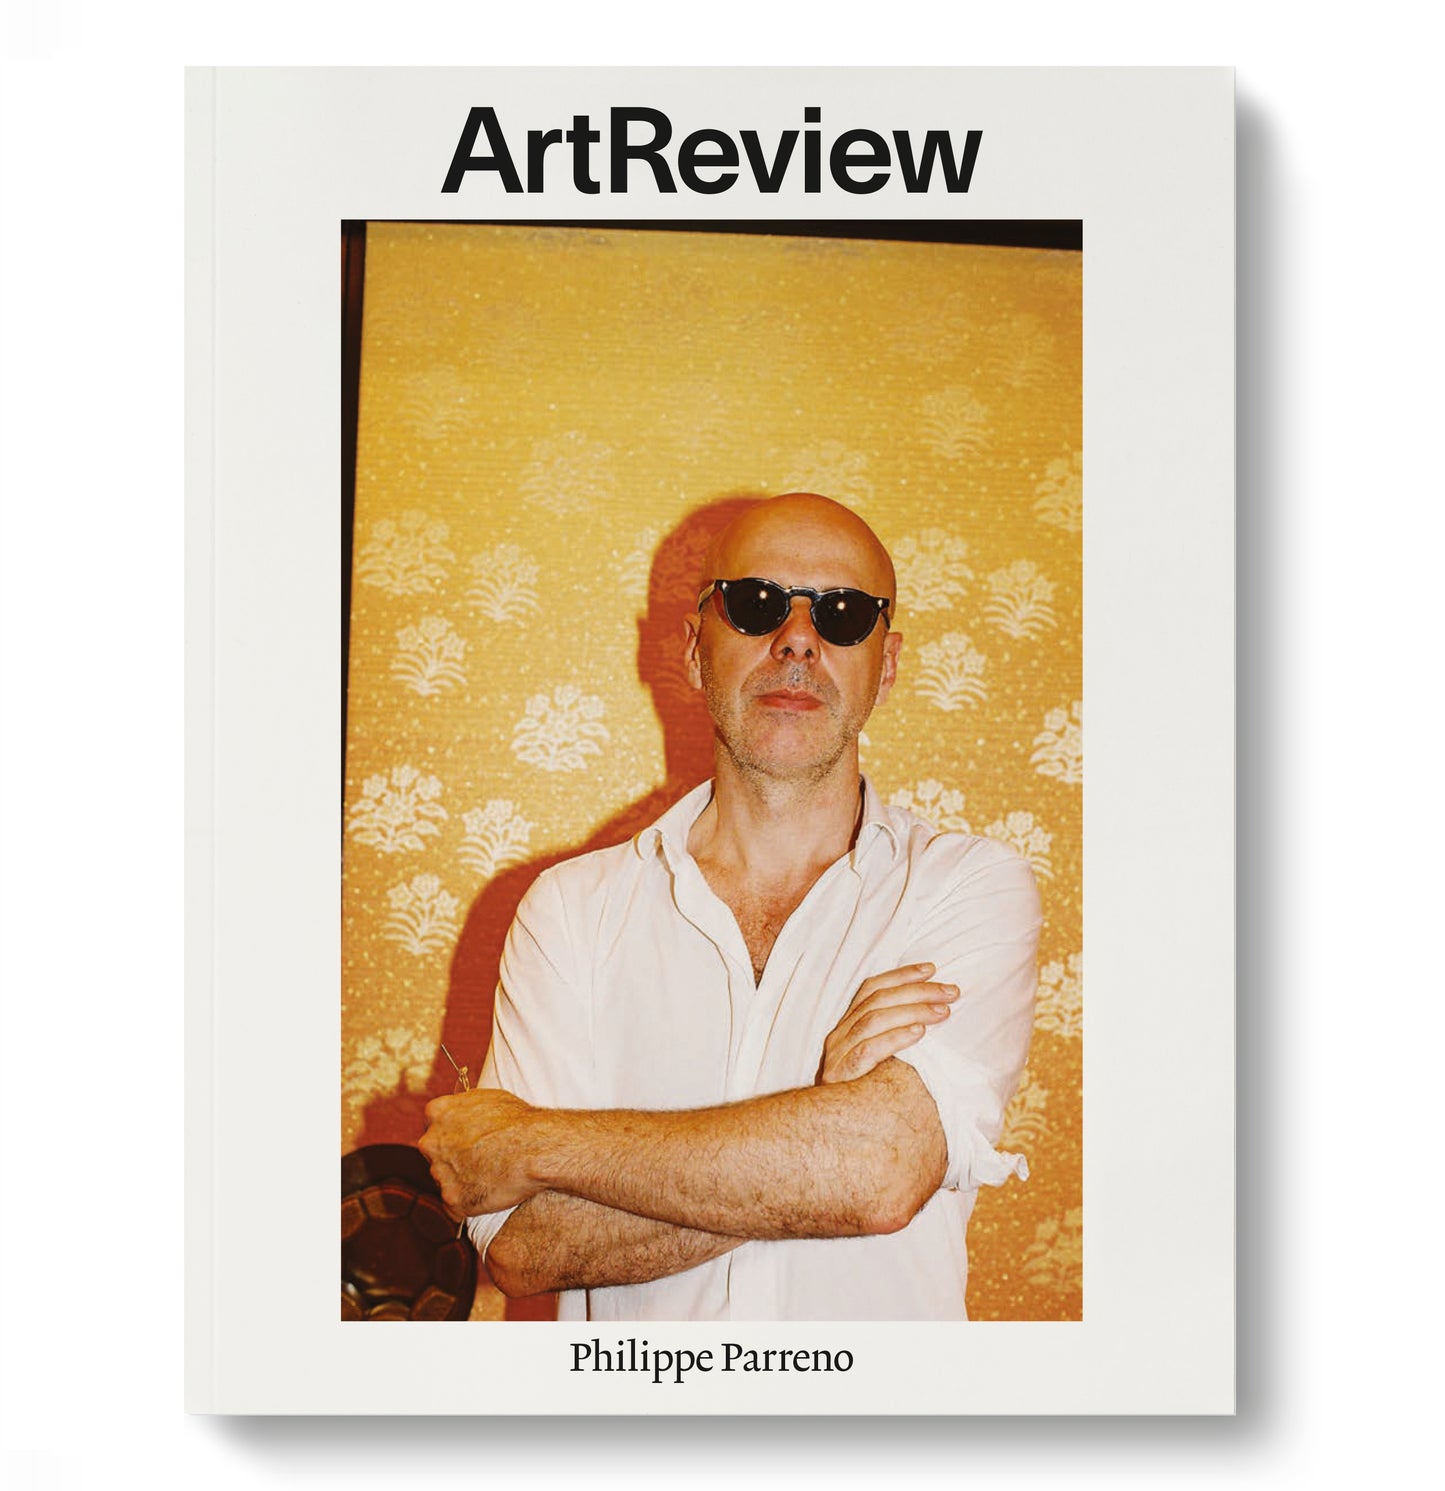 ArtReview October 2015